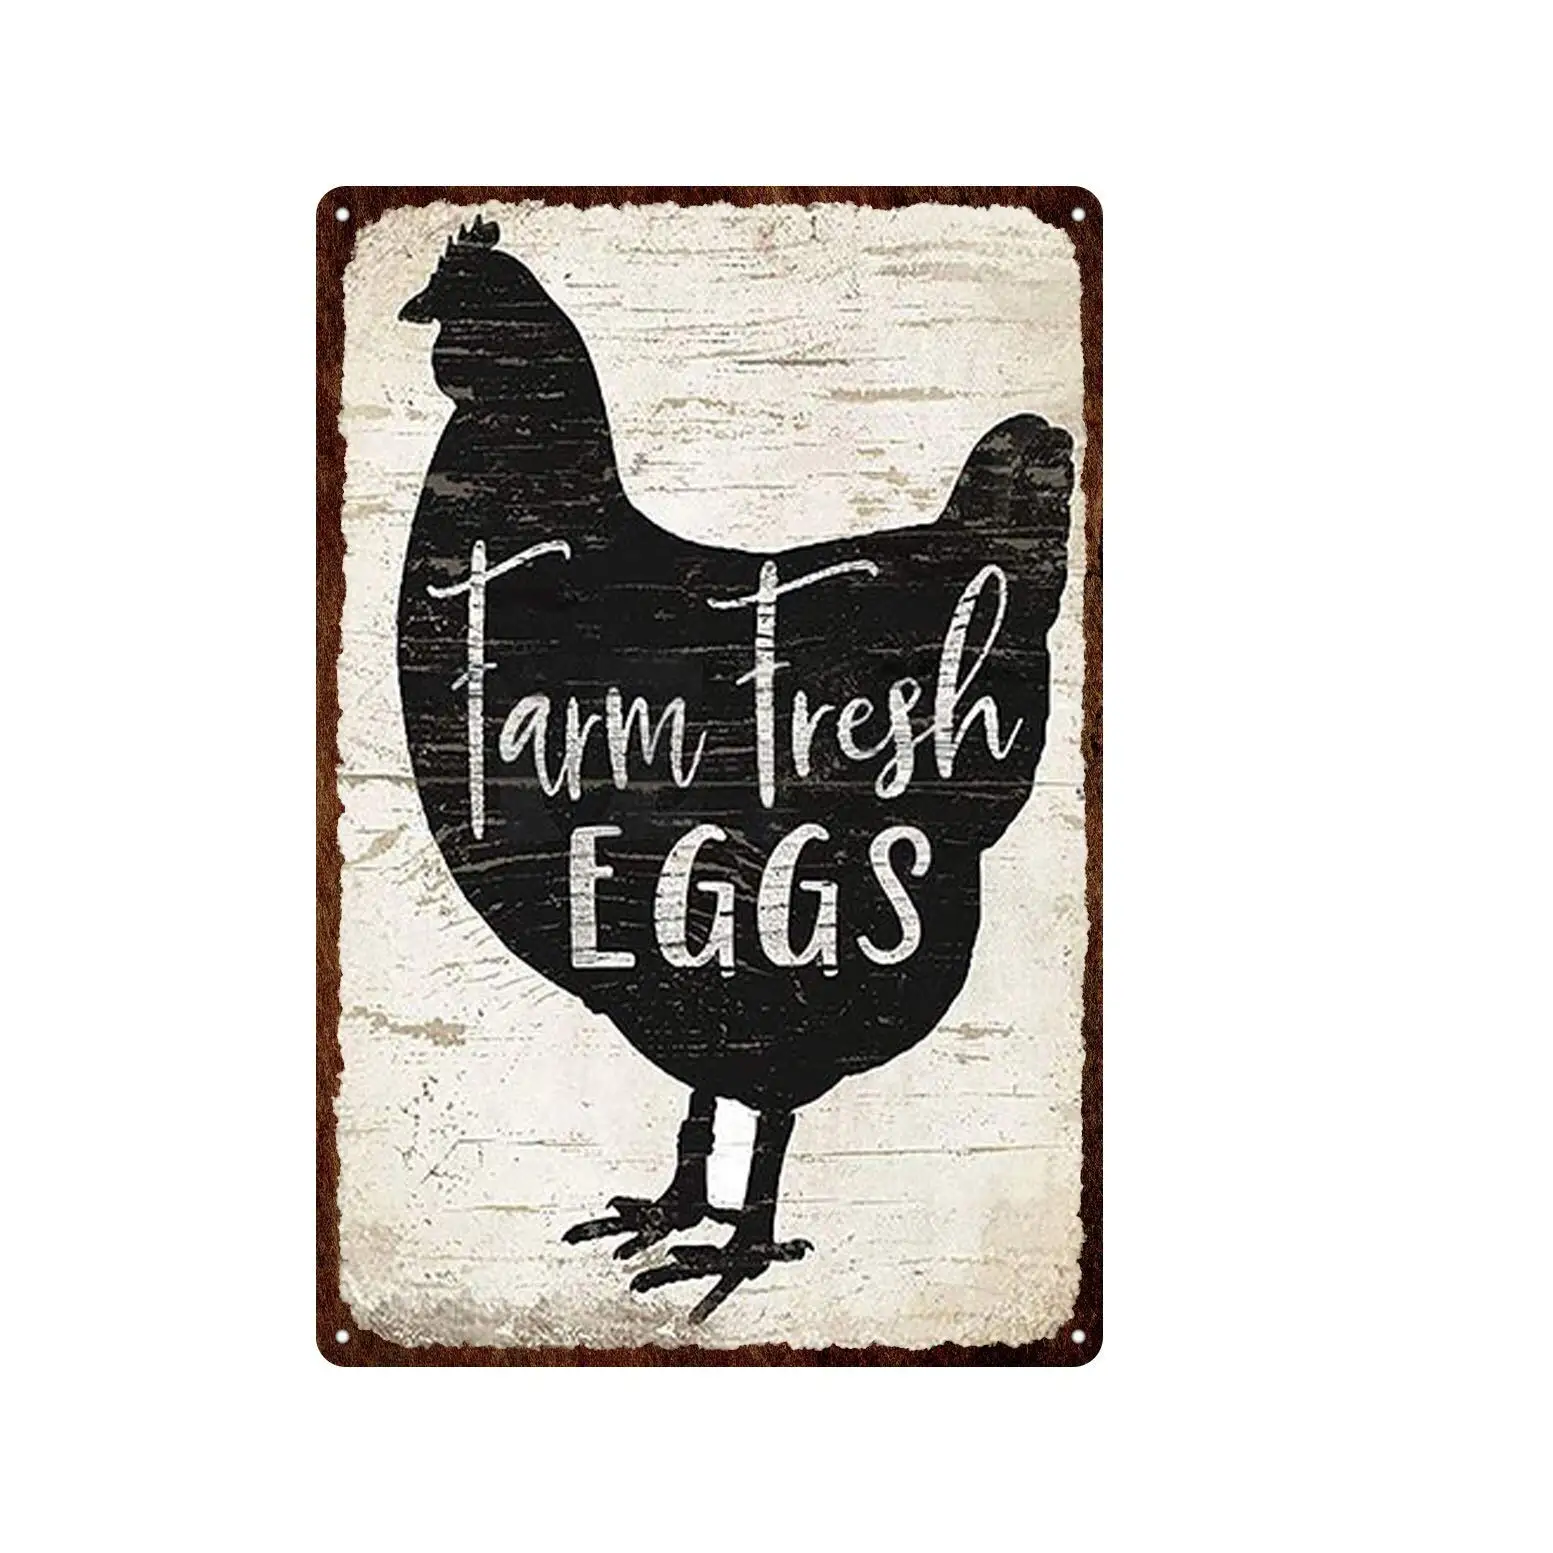 

Vintage Style Fresh Eggs Metal Tin Sign Farm Metal Plate Chicken Coop Shabby Plaque Bar Pub Restaurant Wall Covering Creative